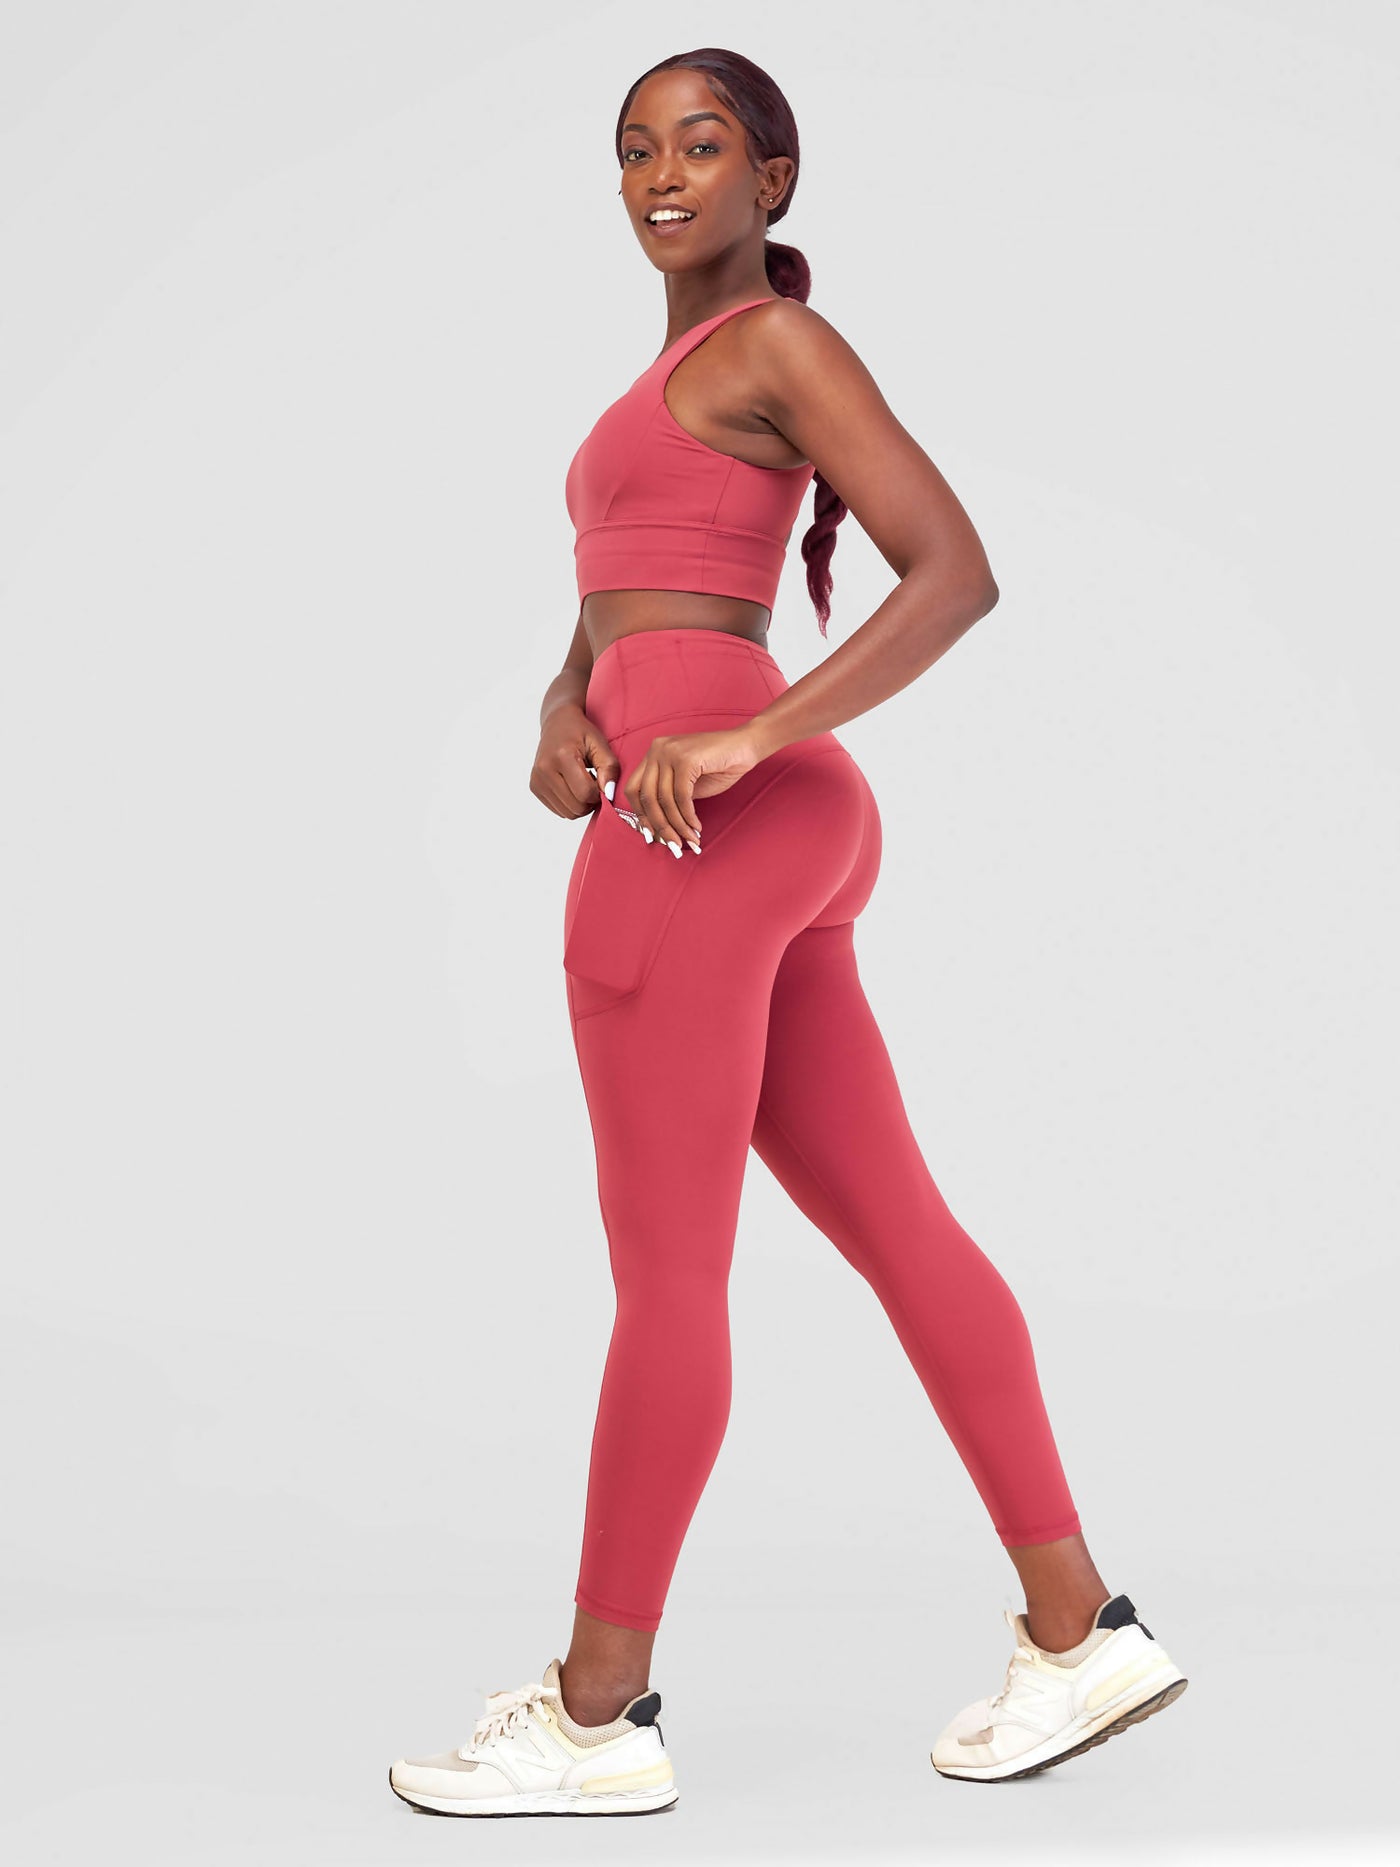 Flen Store With Pockets Leggings & Sports Bra Set - Flame Red